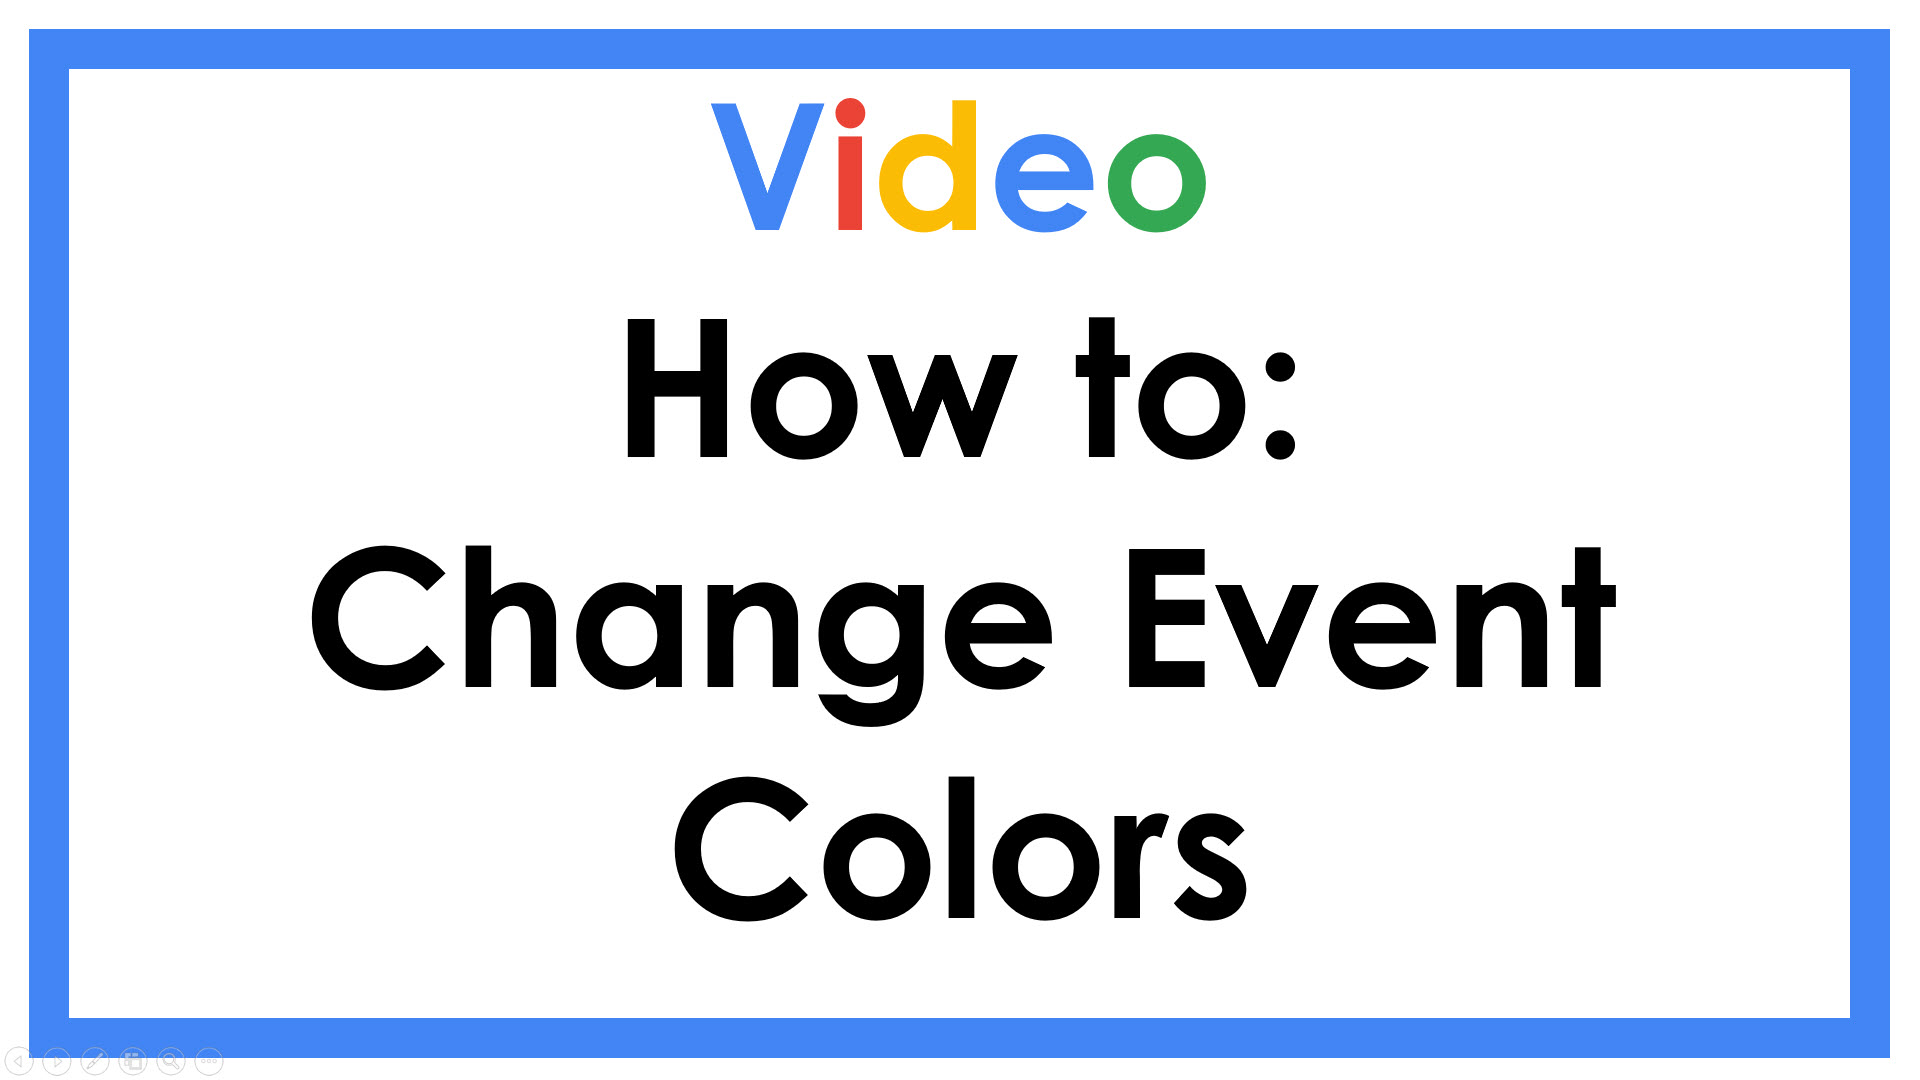 Video: How to Change Event Colors